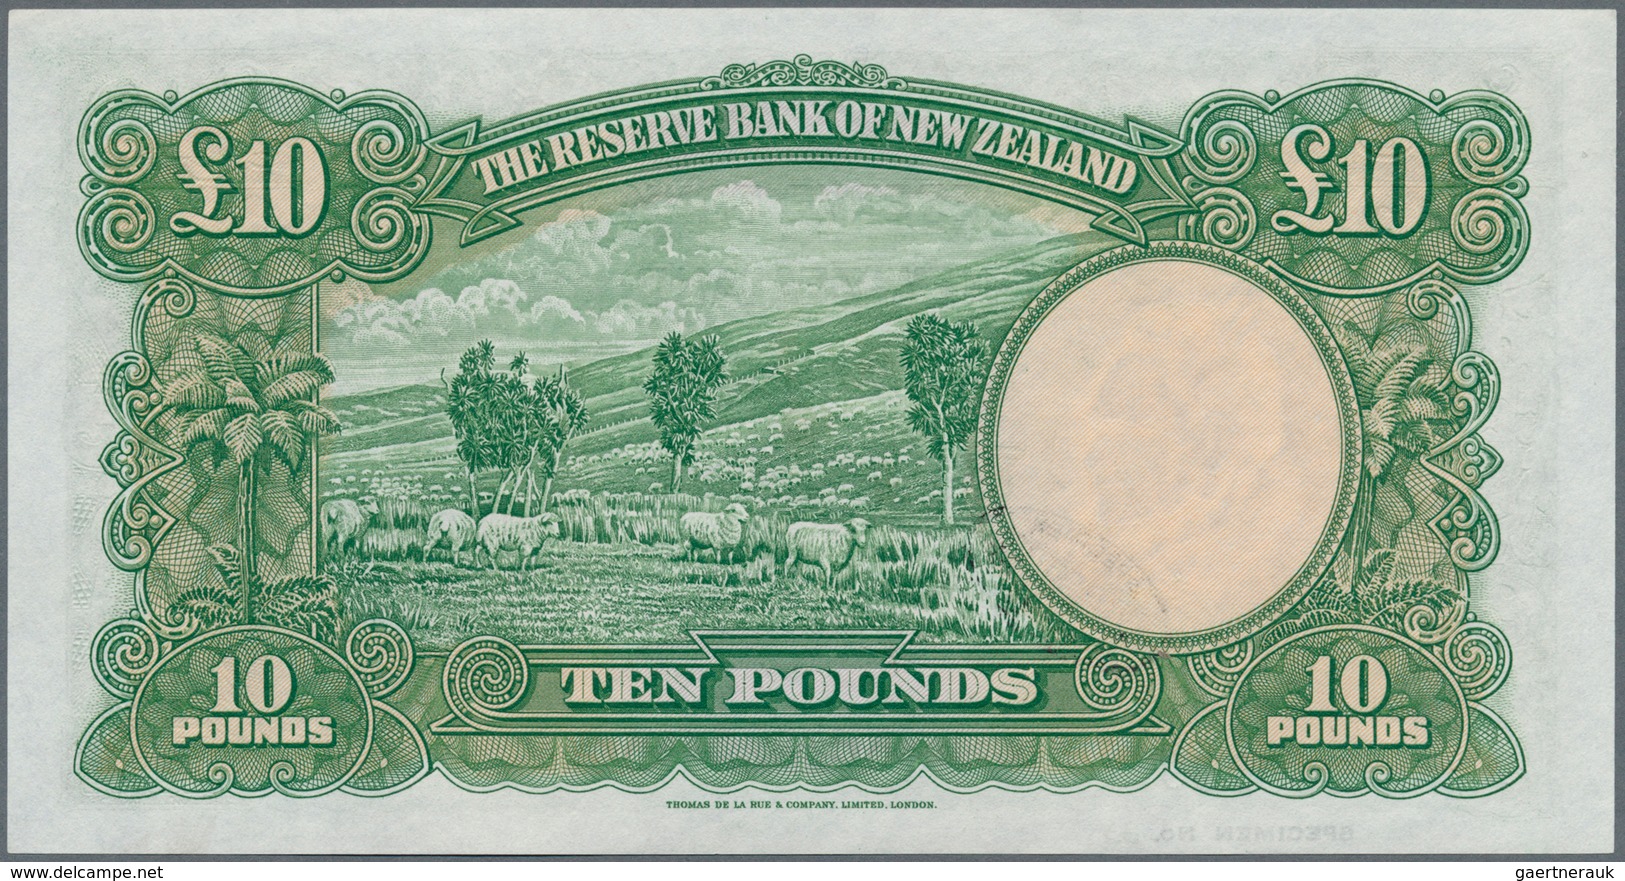 02116 New Zealand / Neuseeland: very rare Set of 5 SPECIMEN banknotes from 1 to 10 Pounds ND(1940-55) sign